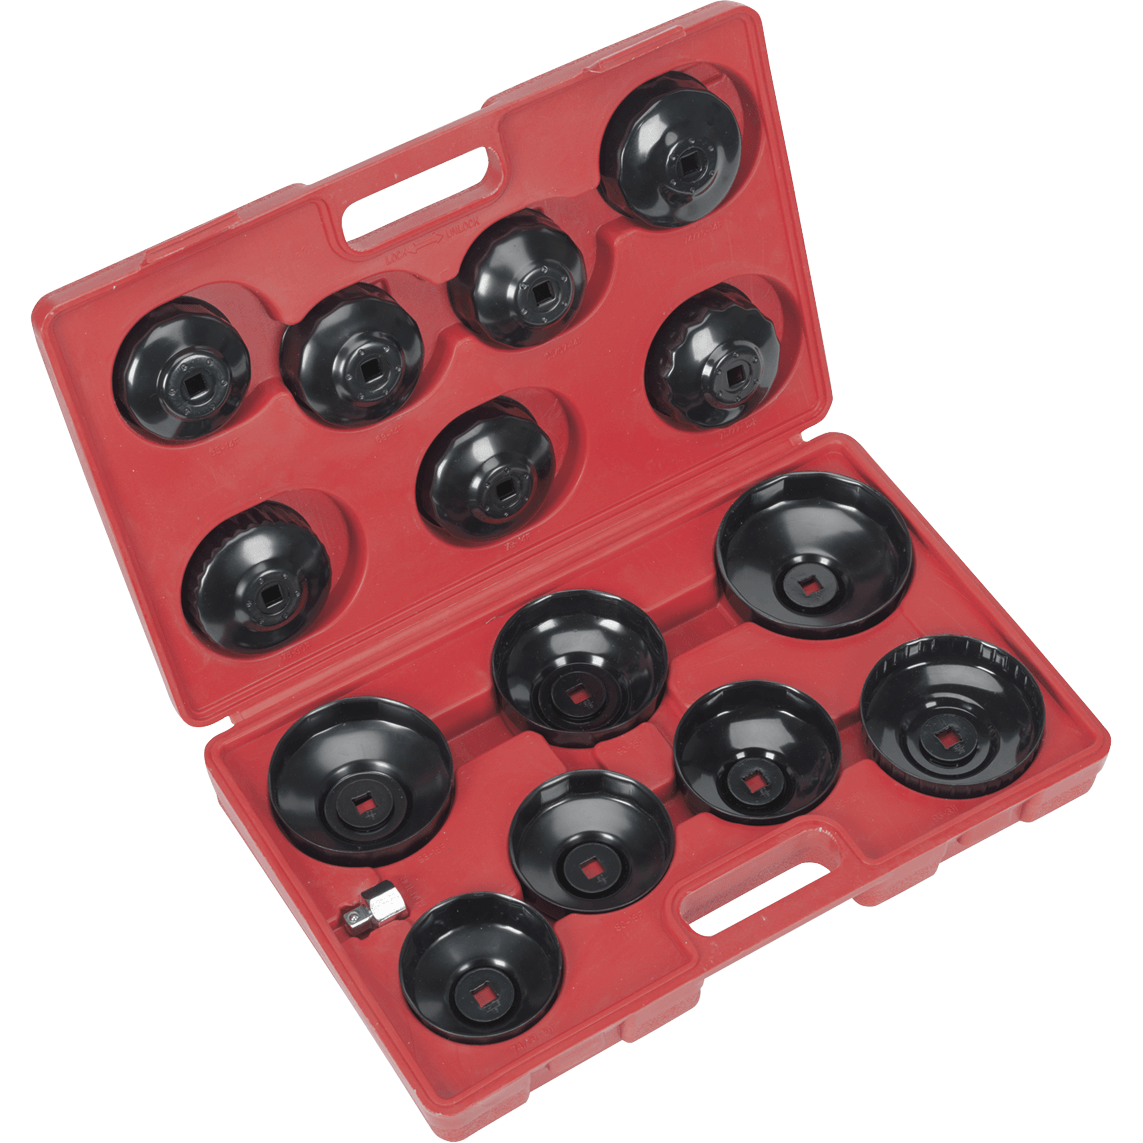 Sealey VS7003 15 Piece Oil Filter Cap Wrench Set